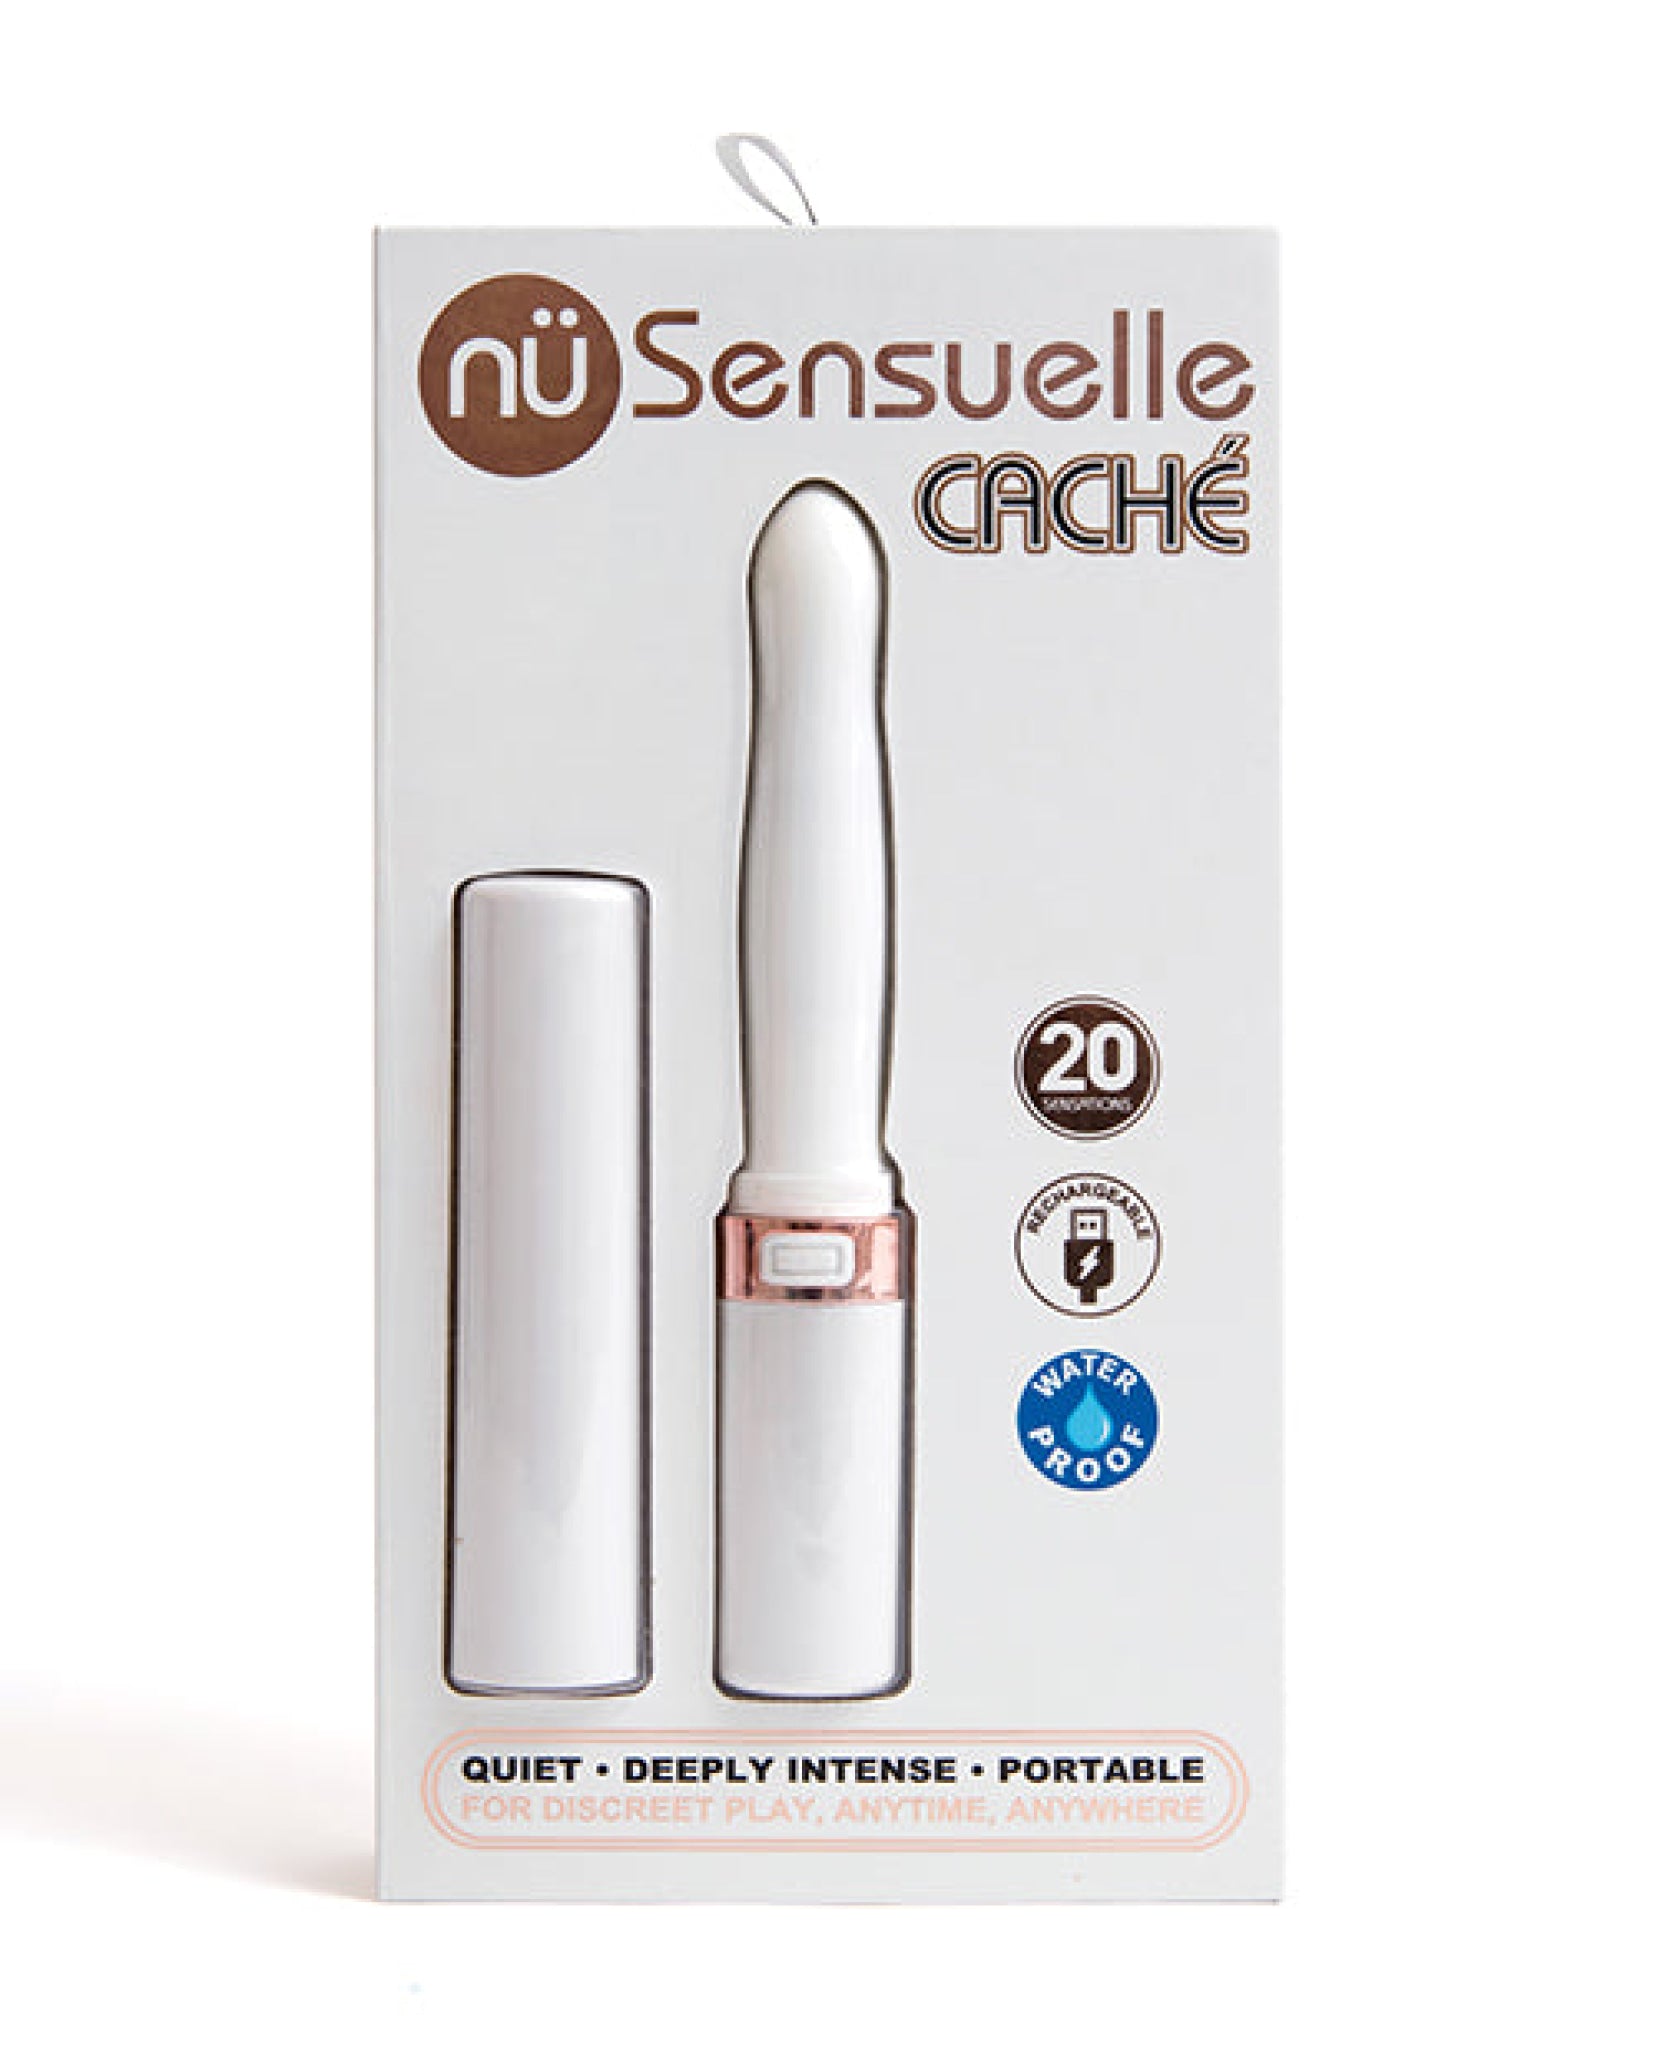 Nu Sensuelle Cache 20 Functions Covered Lipstick Vibe Nu